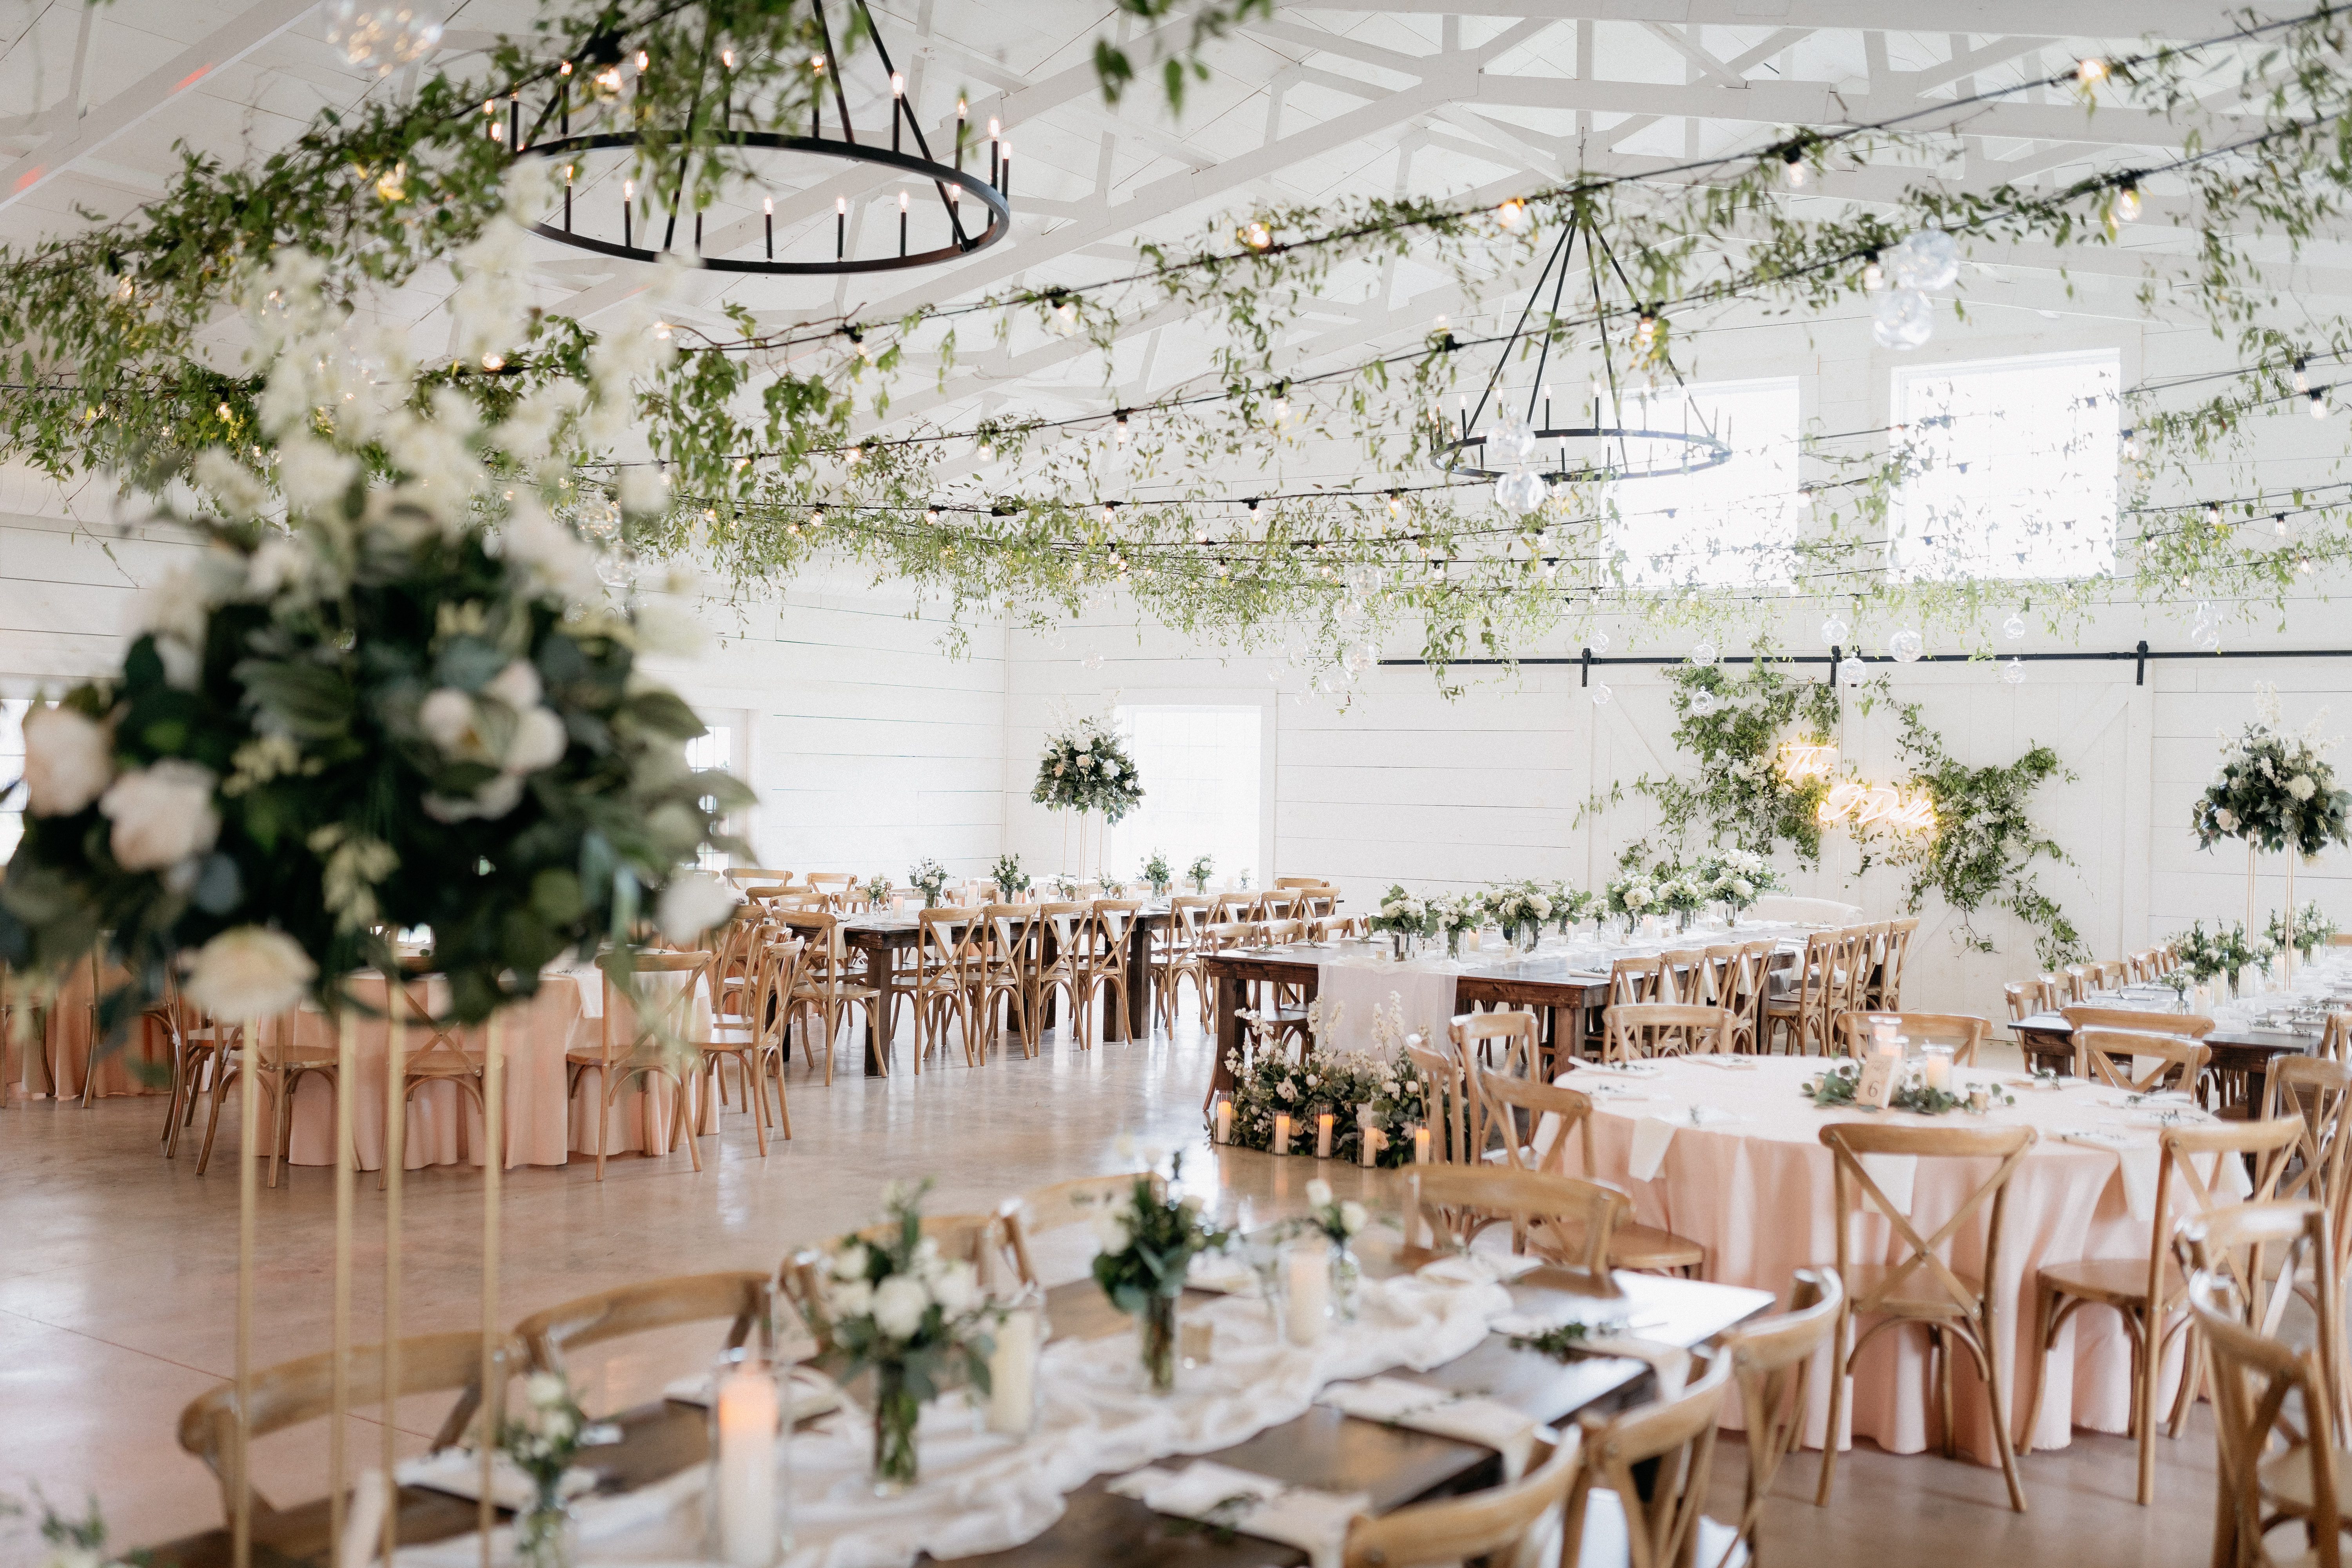 White lights and greenery are strung across rafters inside a bright, airy barn. Satin tablecloths, votives and floral arrangements top each long reception table.